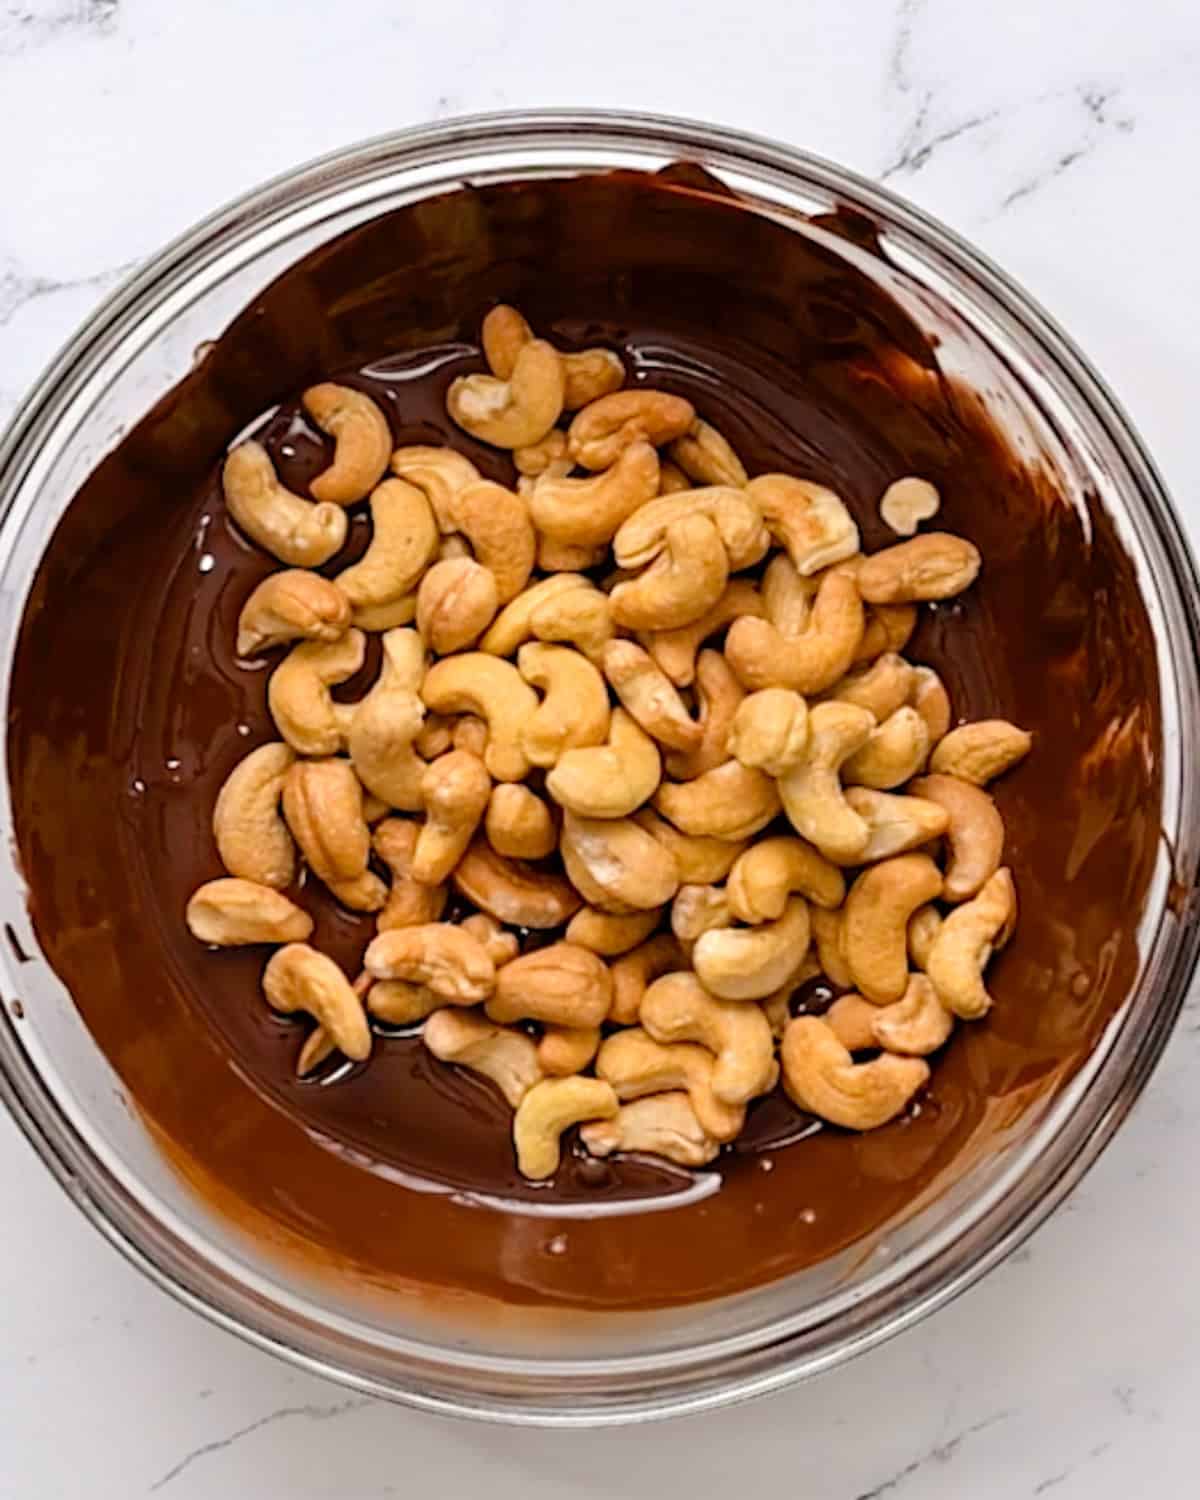 How to Make Chocolate Covered Cashews - cashews added to melted chocolate in a bowl before stirring